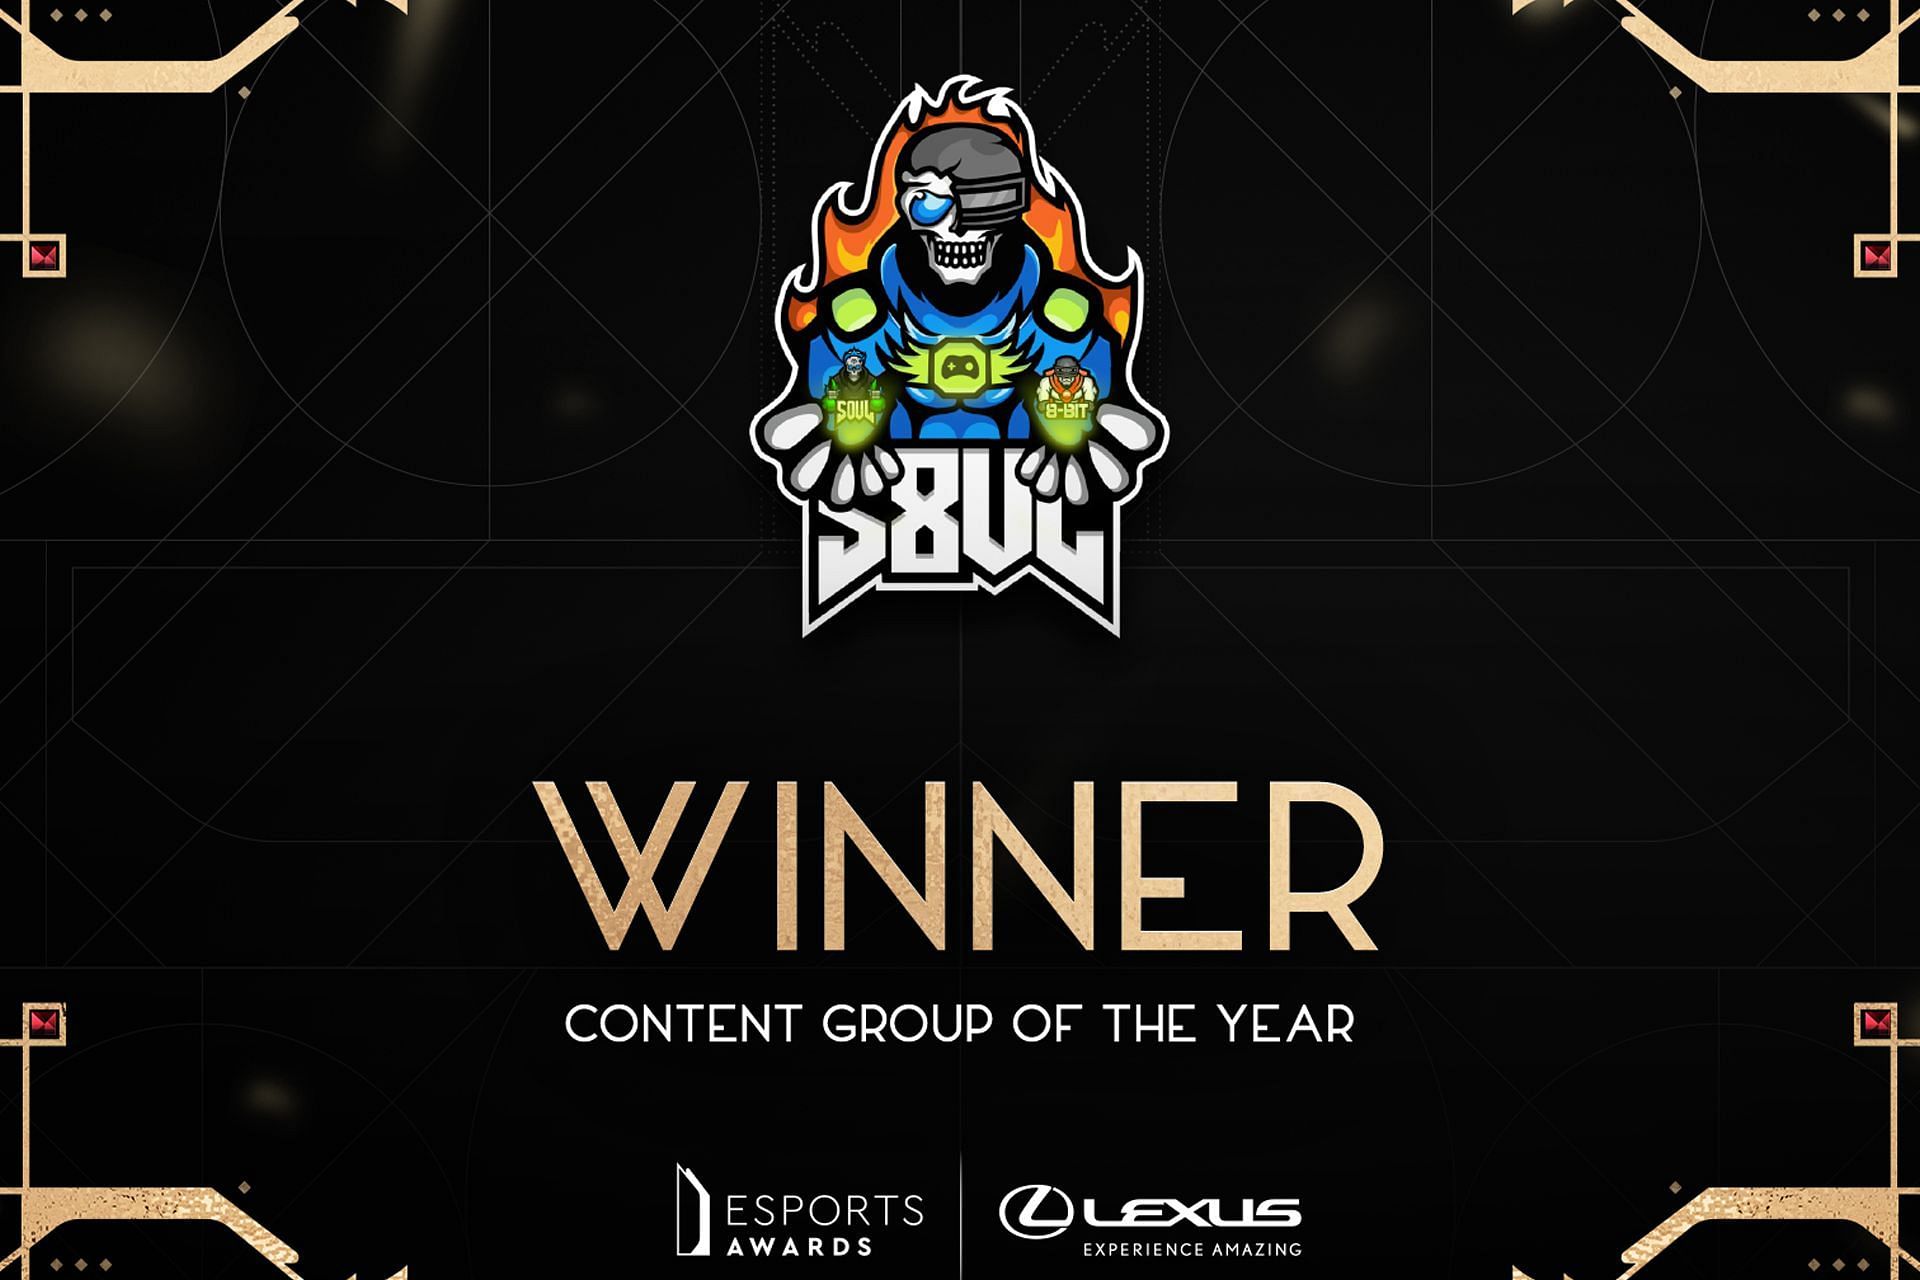 S8UL Esports had a wonderful 2022 with a win at the Esports Awards in the Content Group of the Year category (Image via Esports Awards)